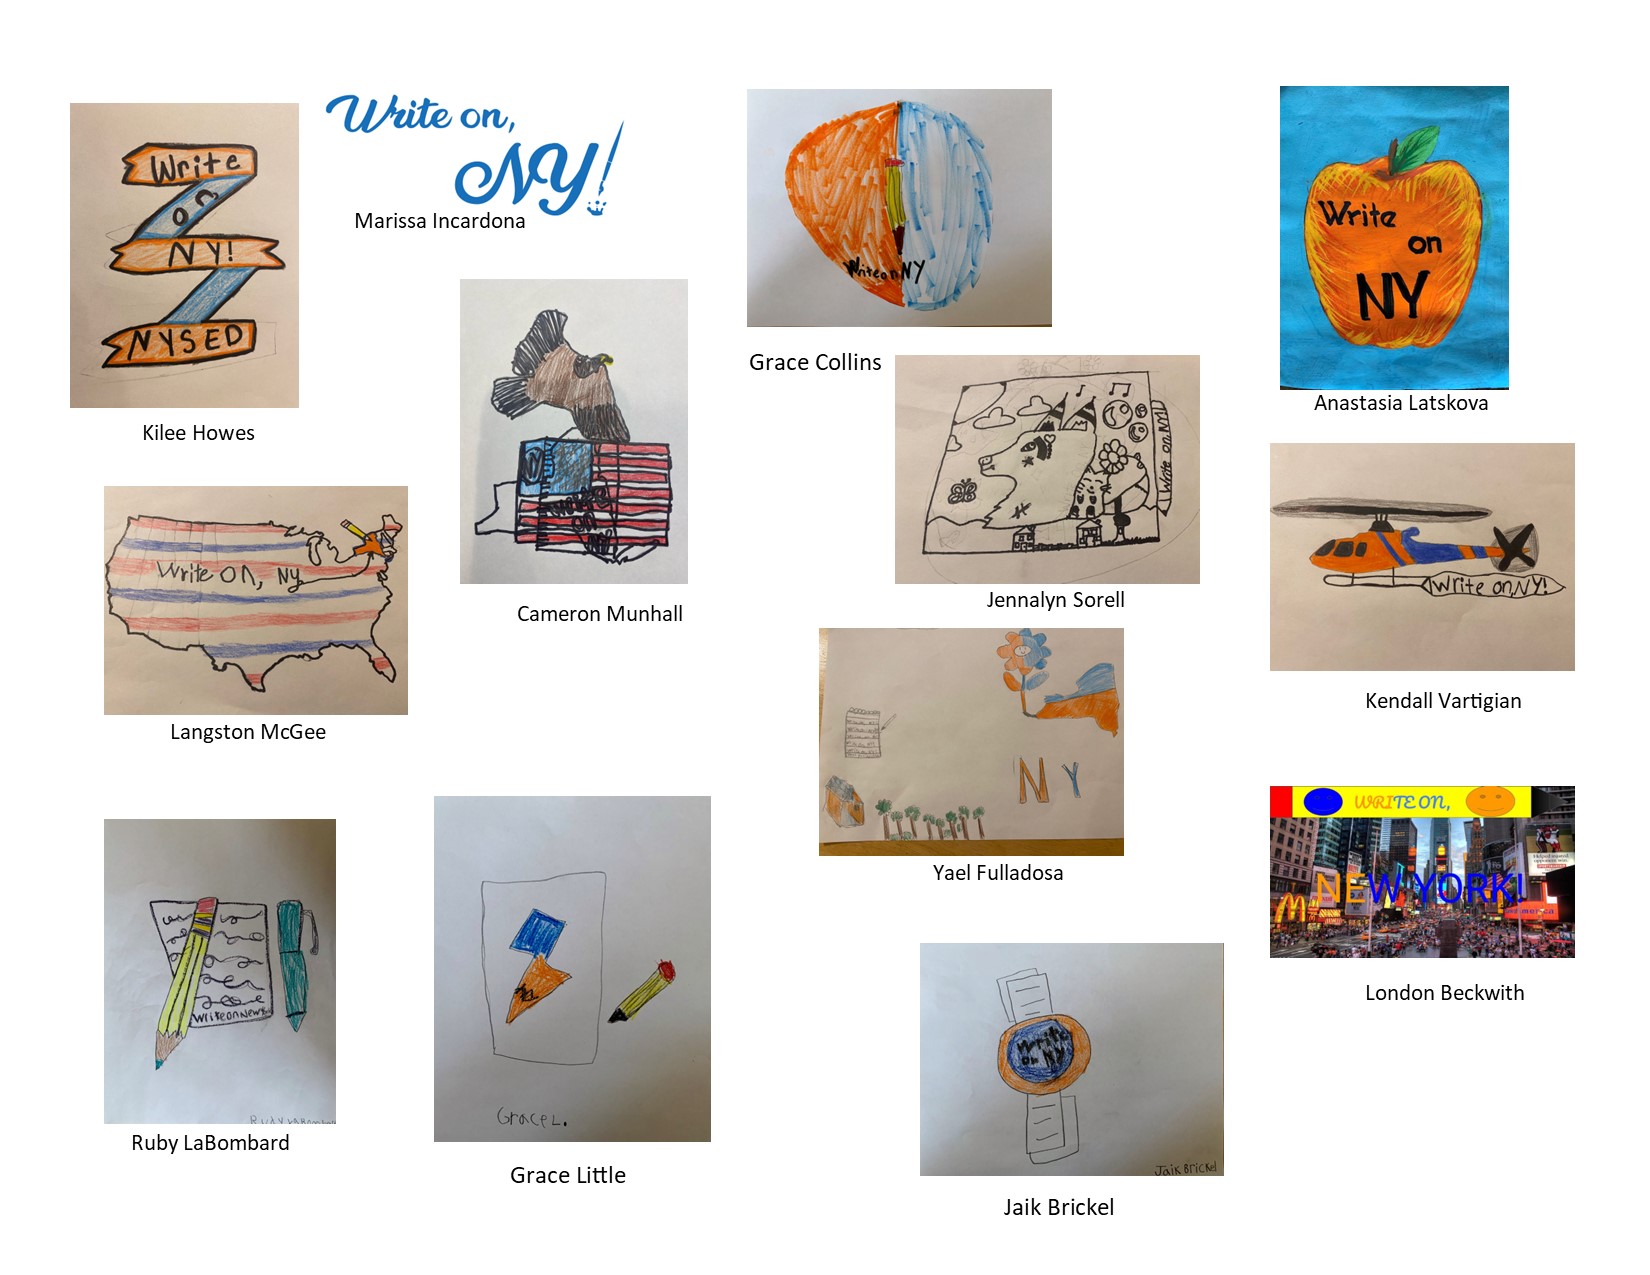 Images of student artwork